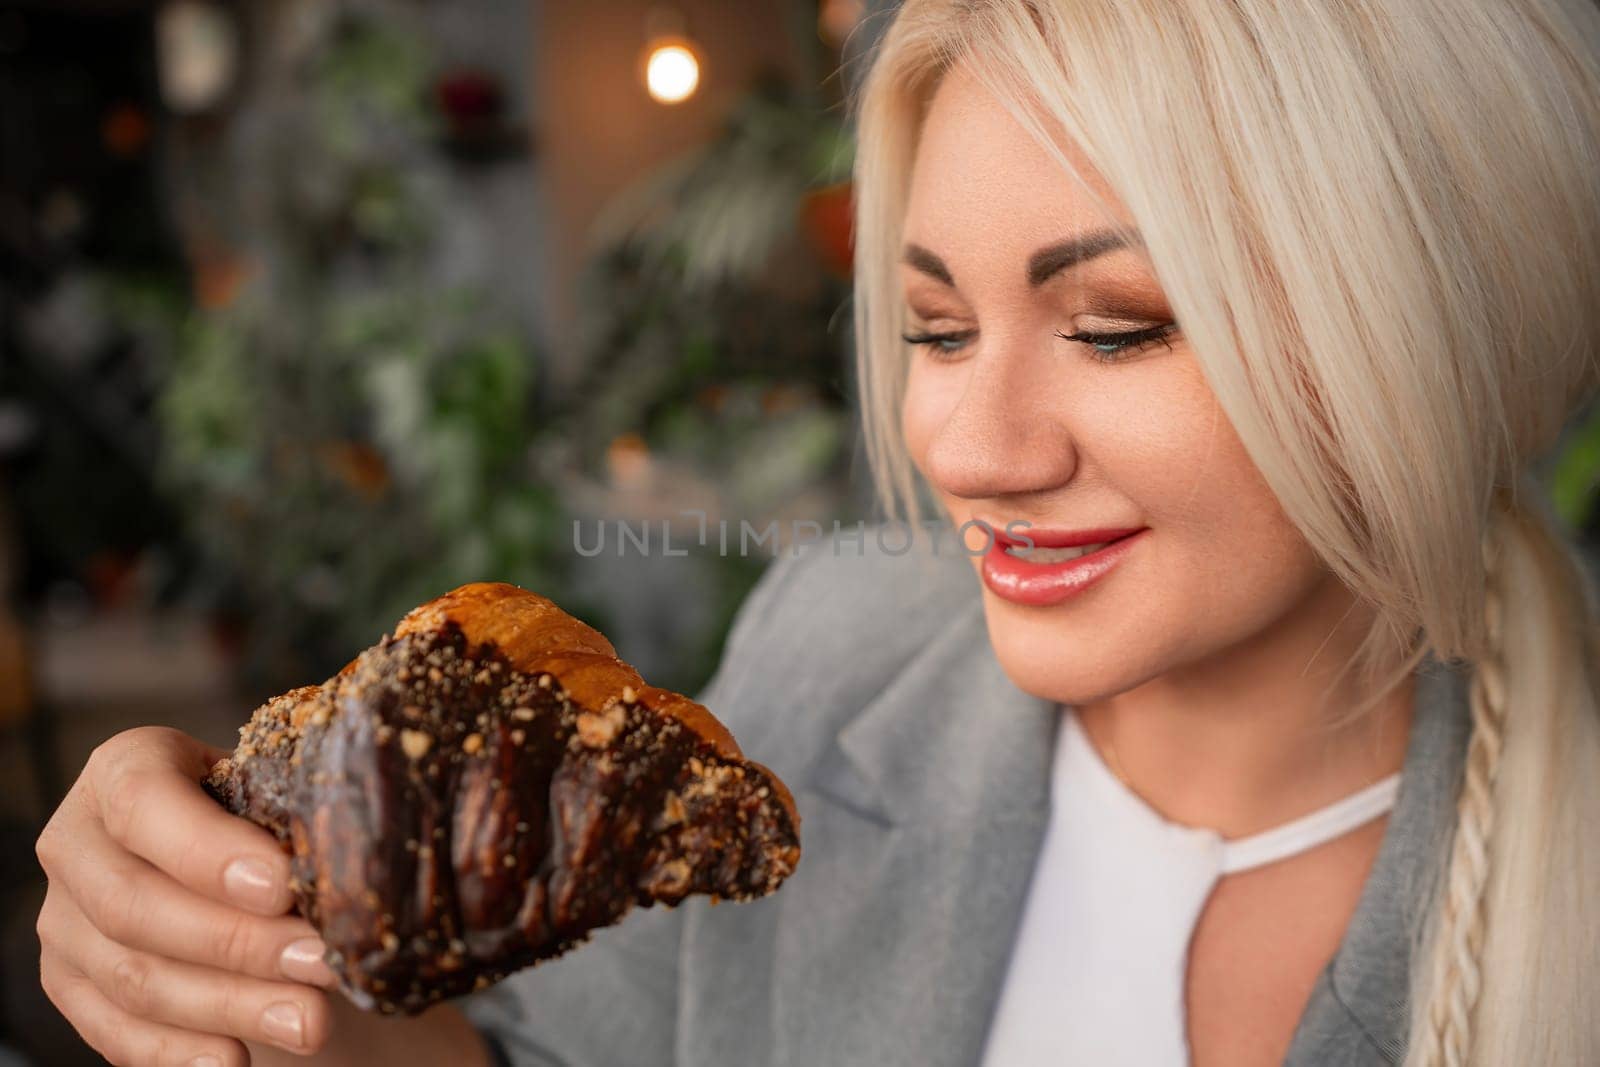 A blonde woman is eating a chocolate pastry. She is smiling and she is enjoying her treat